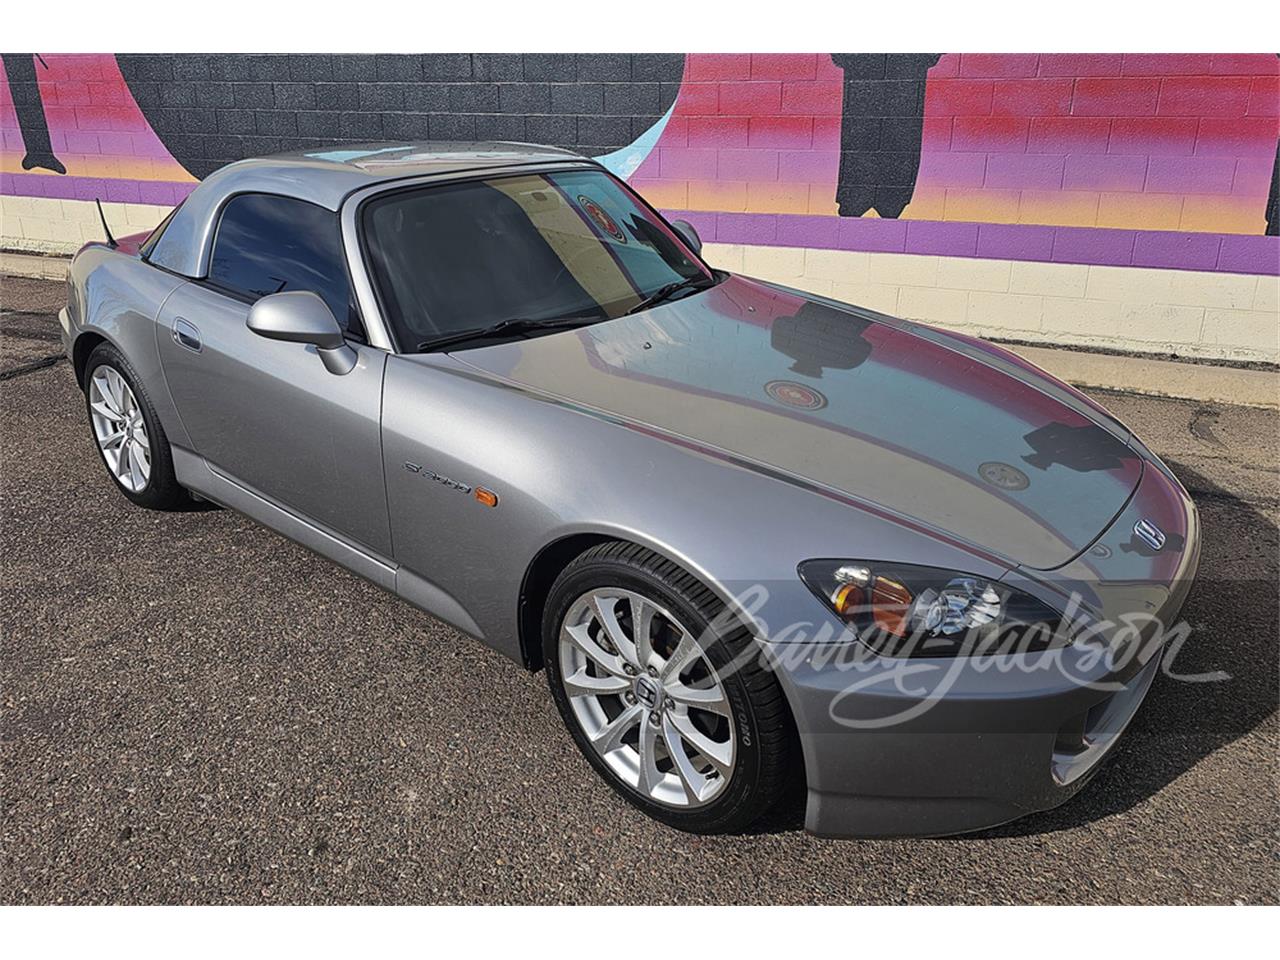 For Sale at Auction: 2006 Honda S2000 in Scottsdale, Arizona for sale in Scottsdale, AZ